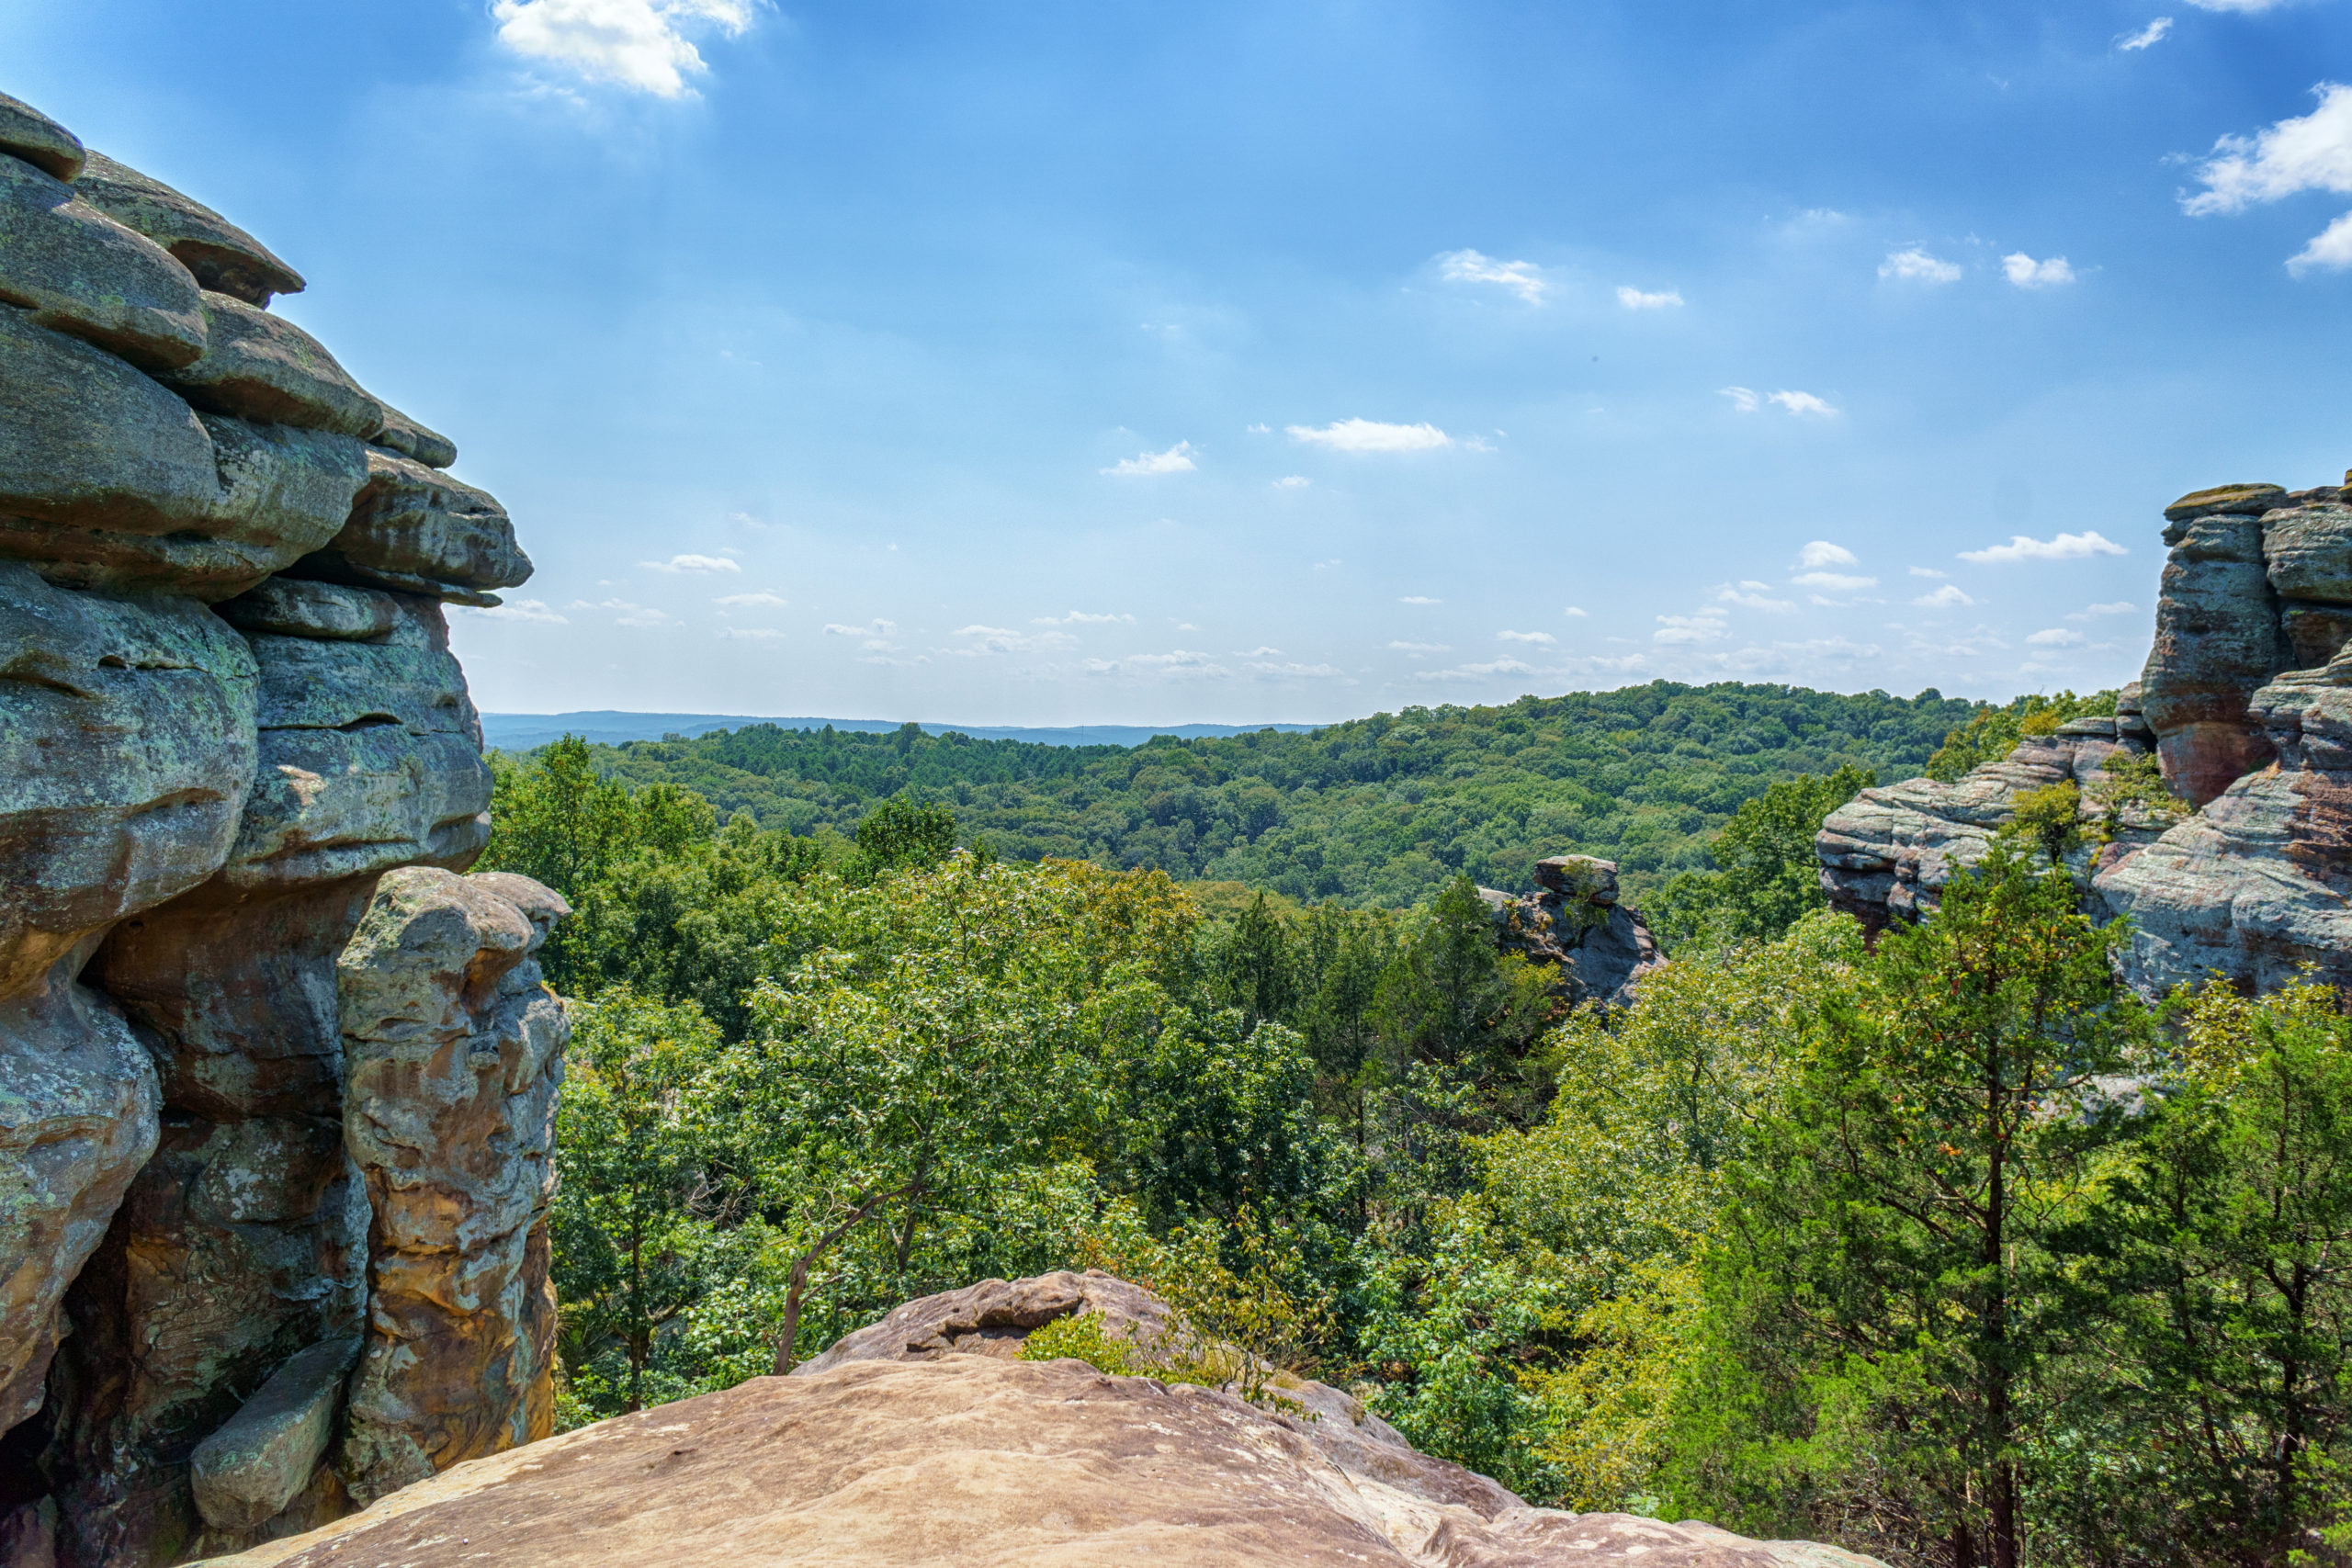 A view of the Devil's Smokestack and Camel Rock at Garden of the Gods in Southern Illinois.